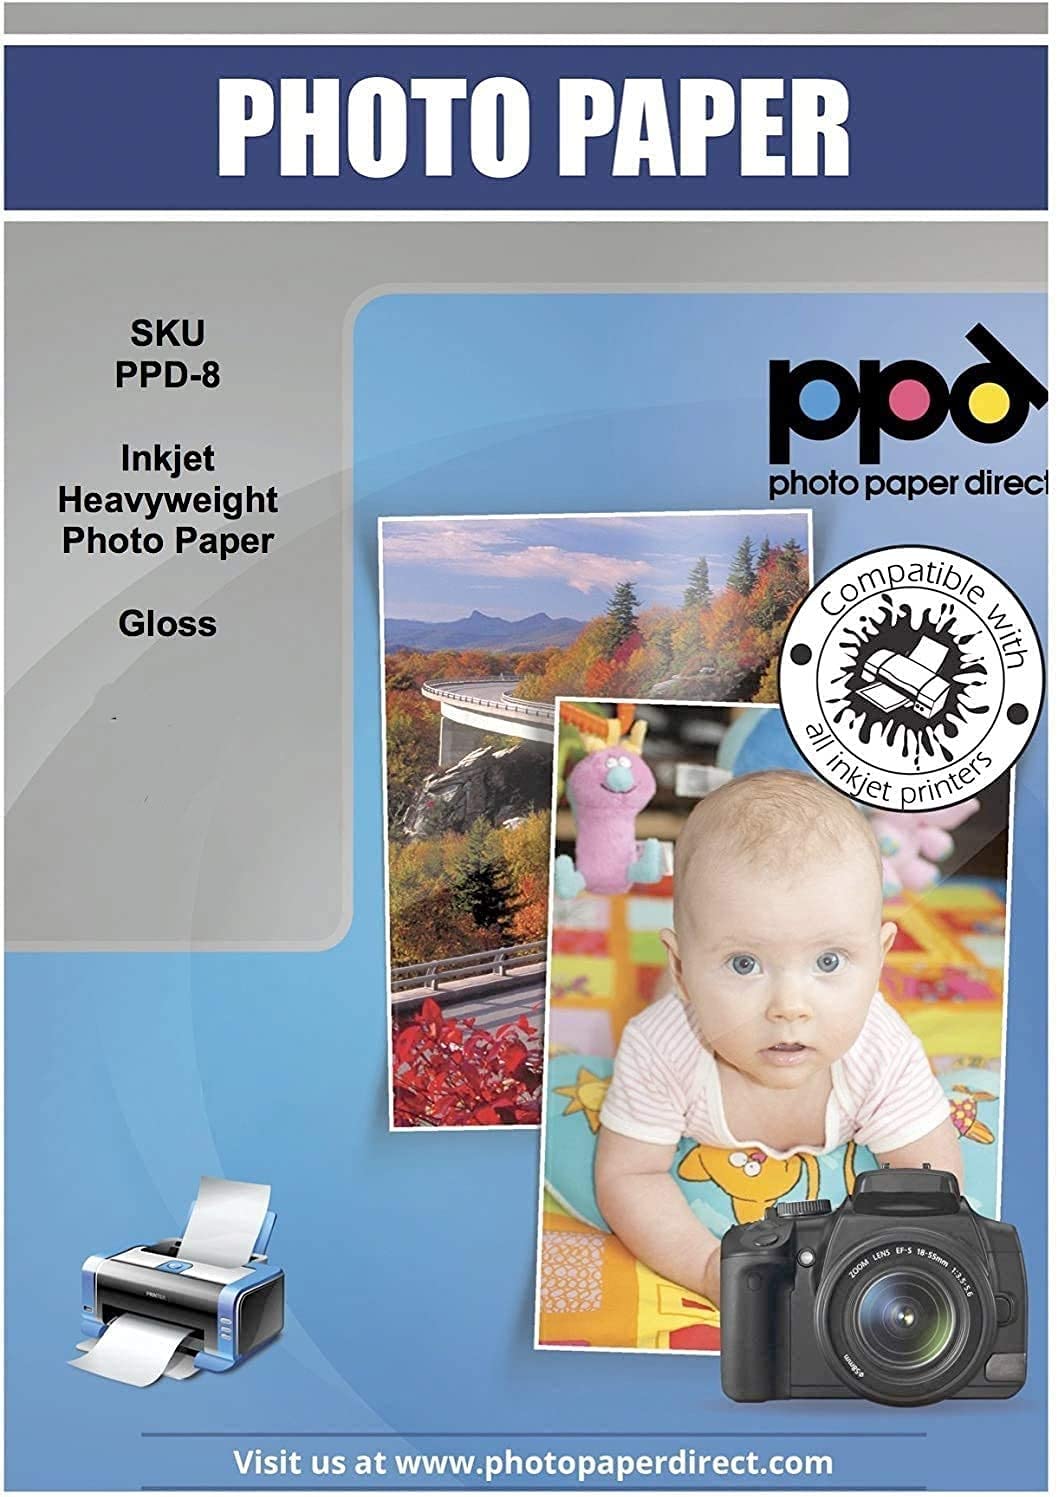 Inkjet Heavyweight Photo Paper Glossy 64lb. 240gsm 10.9mil 8.5 x 11" PPD-8